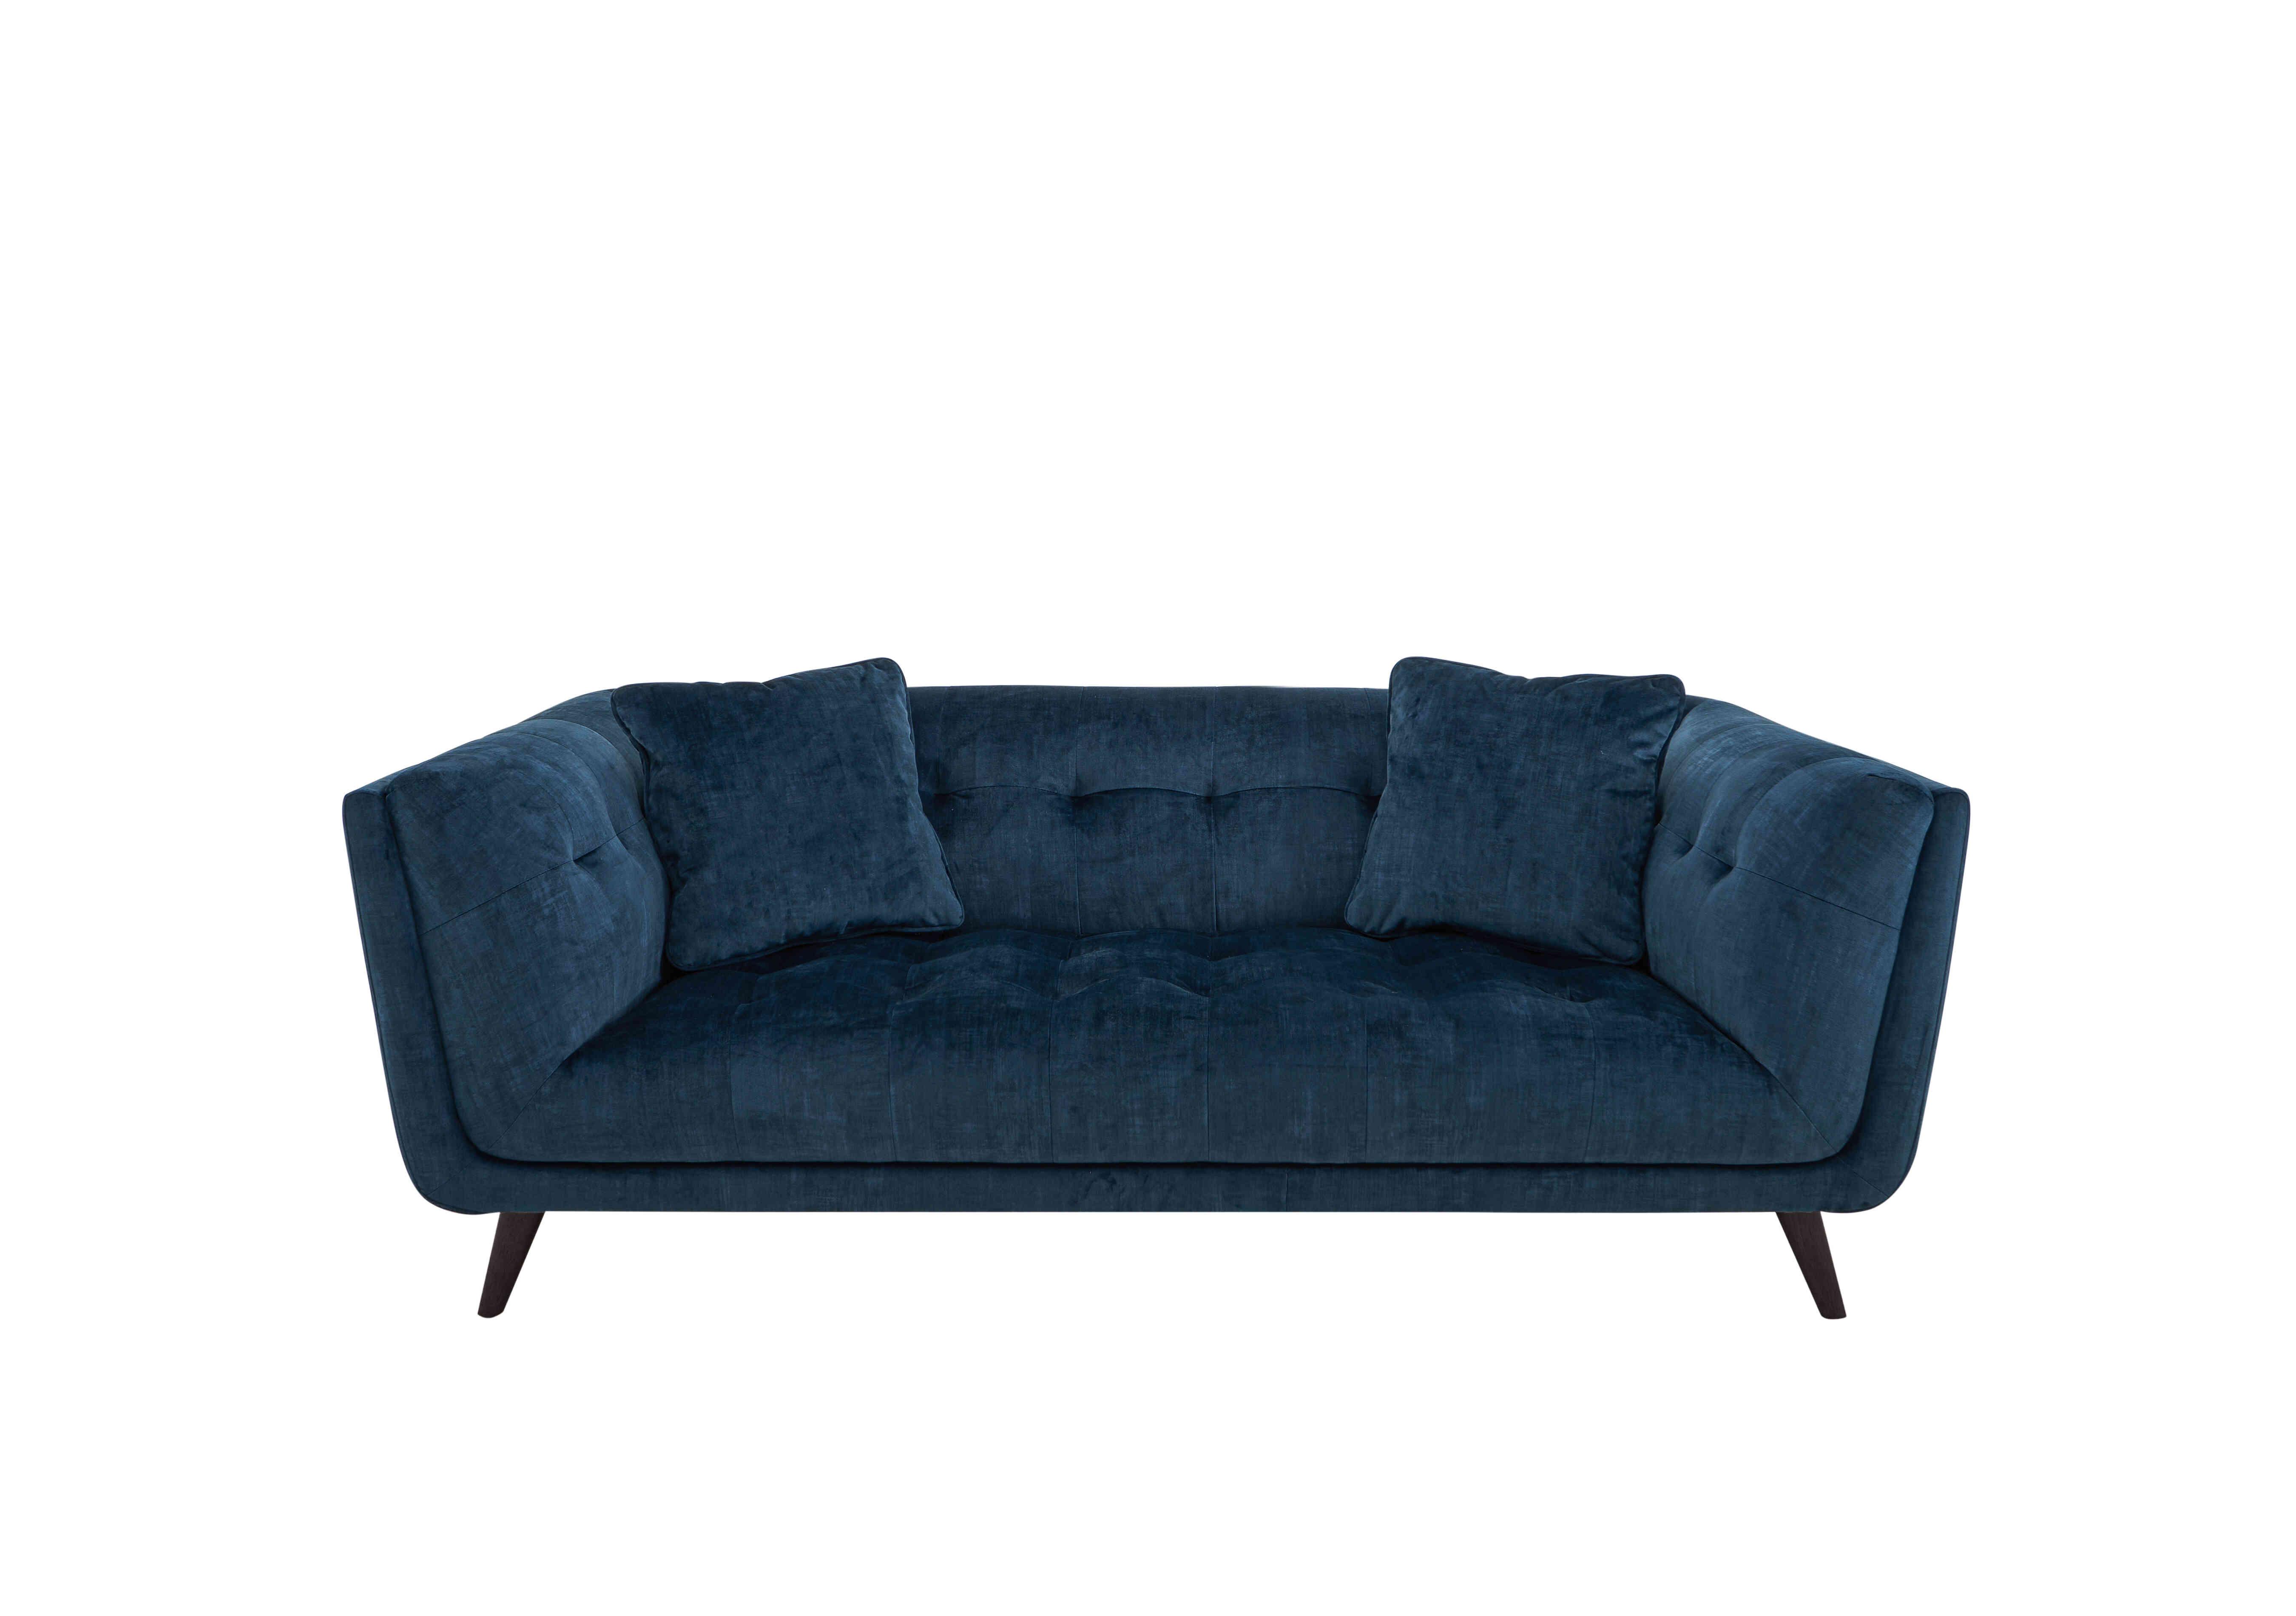 Rene Large 2 Seater Fabric Sofa in Heritage 52000 Airforce Es Ft on Furniture Village